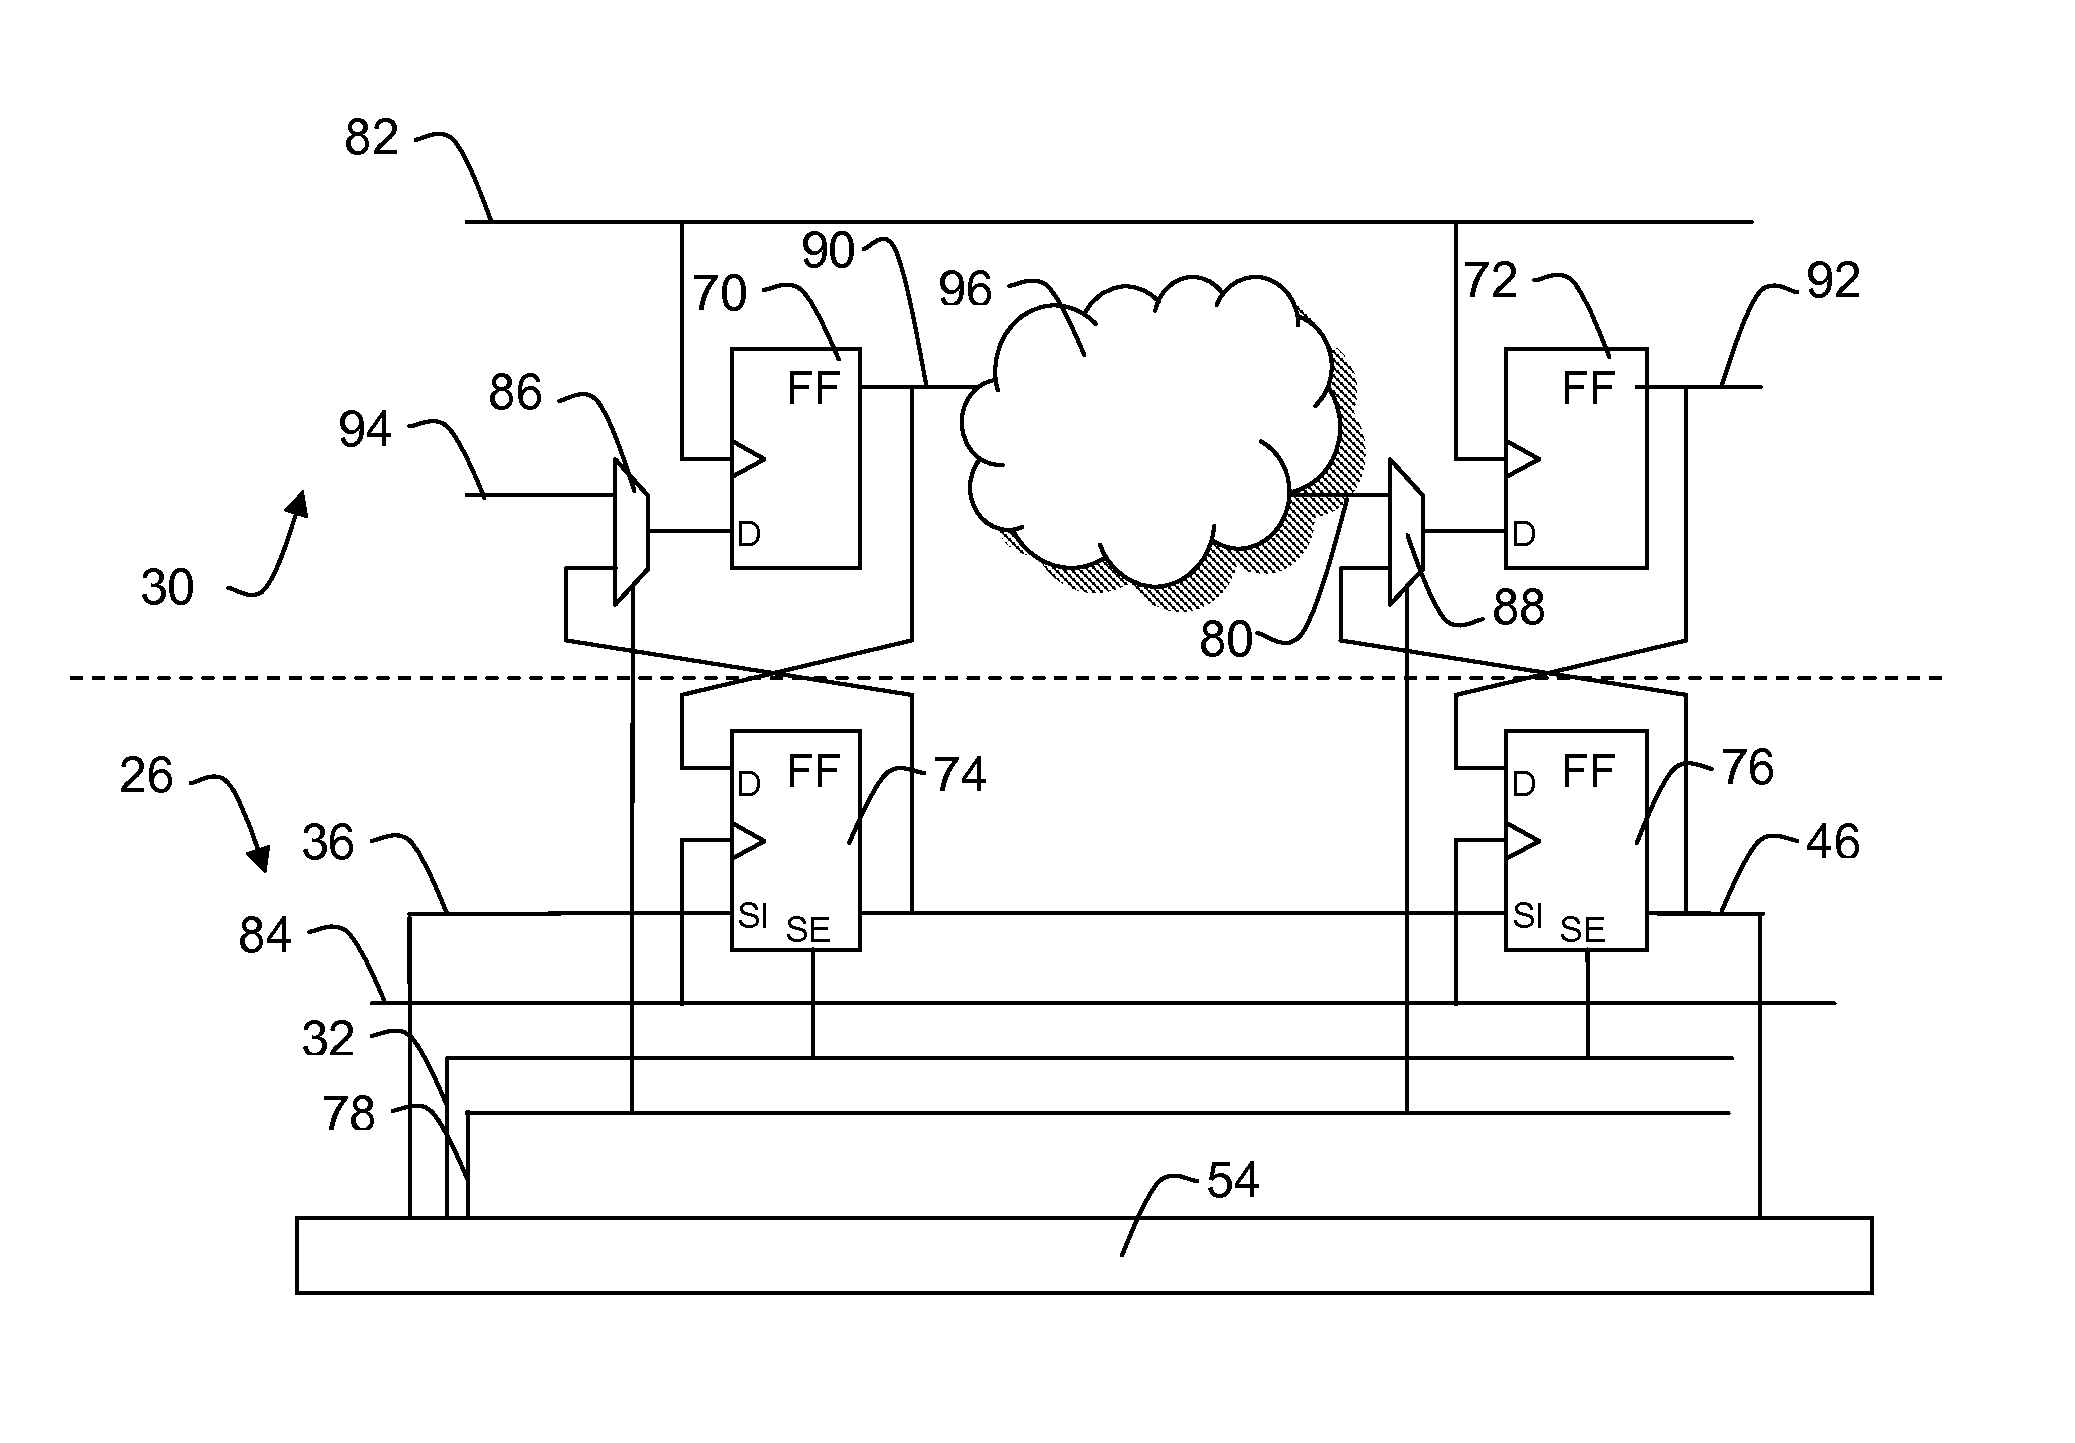 Logic built-in self-test system and method for applying a logic built-in self-test to a device under test